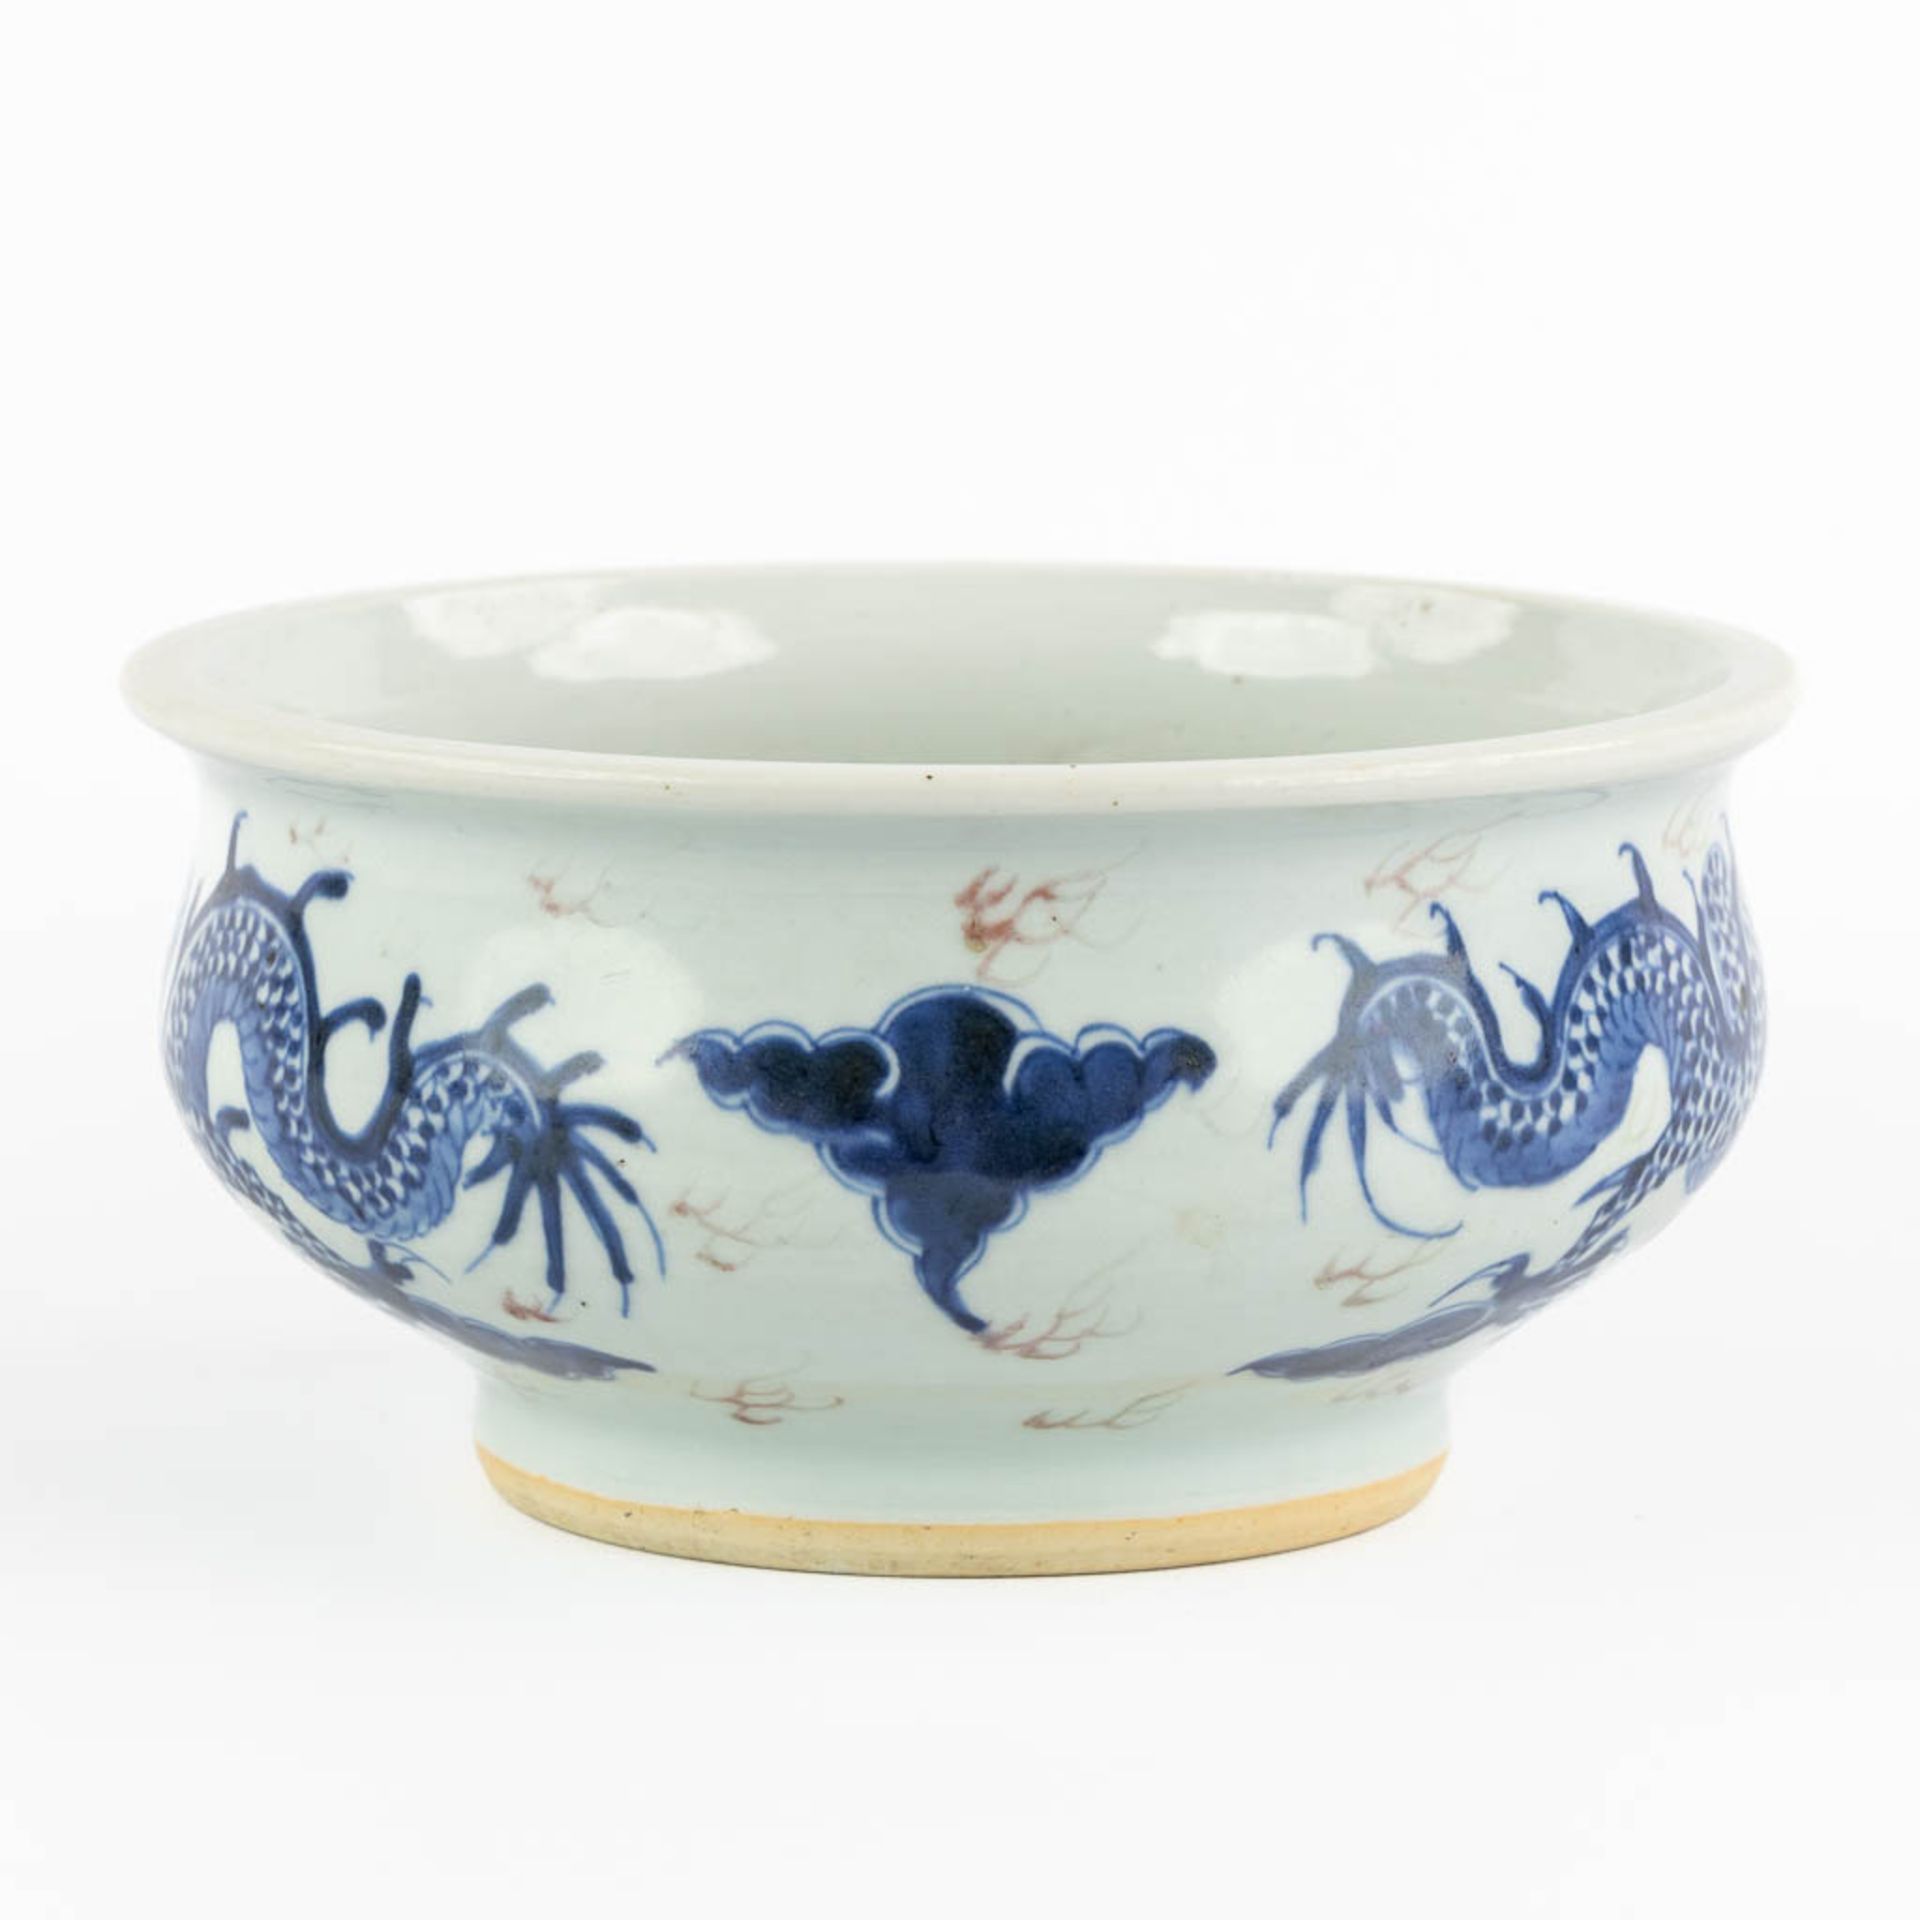 A Chinese cencer with a blue-white and red dragon decor. 19th C. (H:11 x D:21,5 cm) - Image 5 of 11